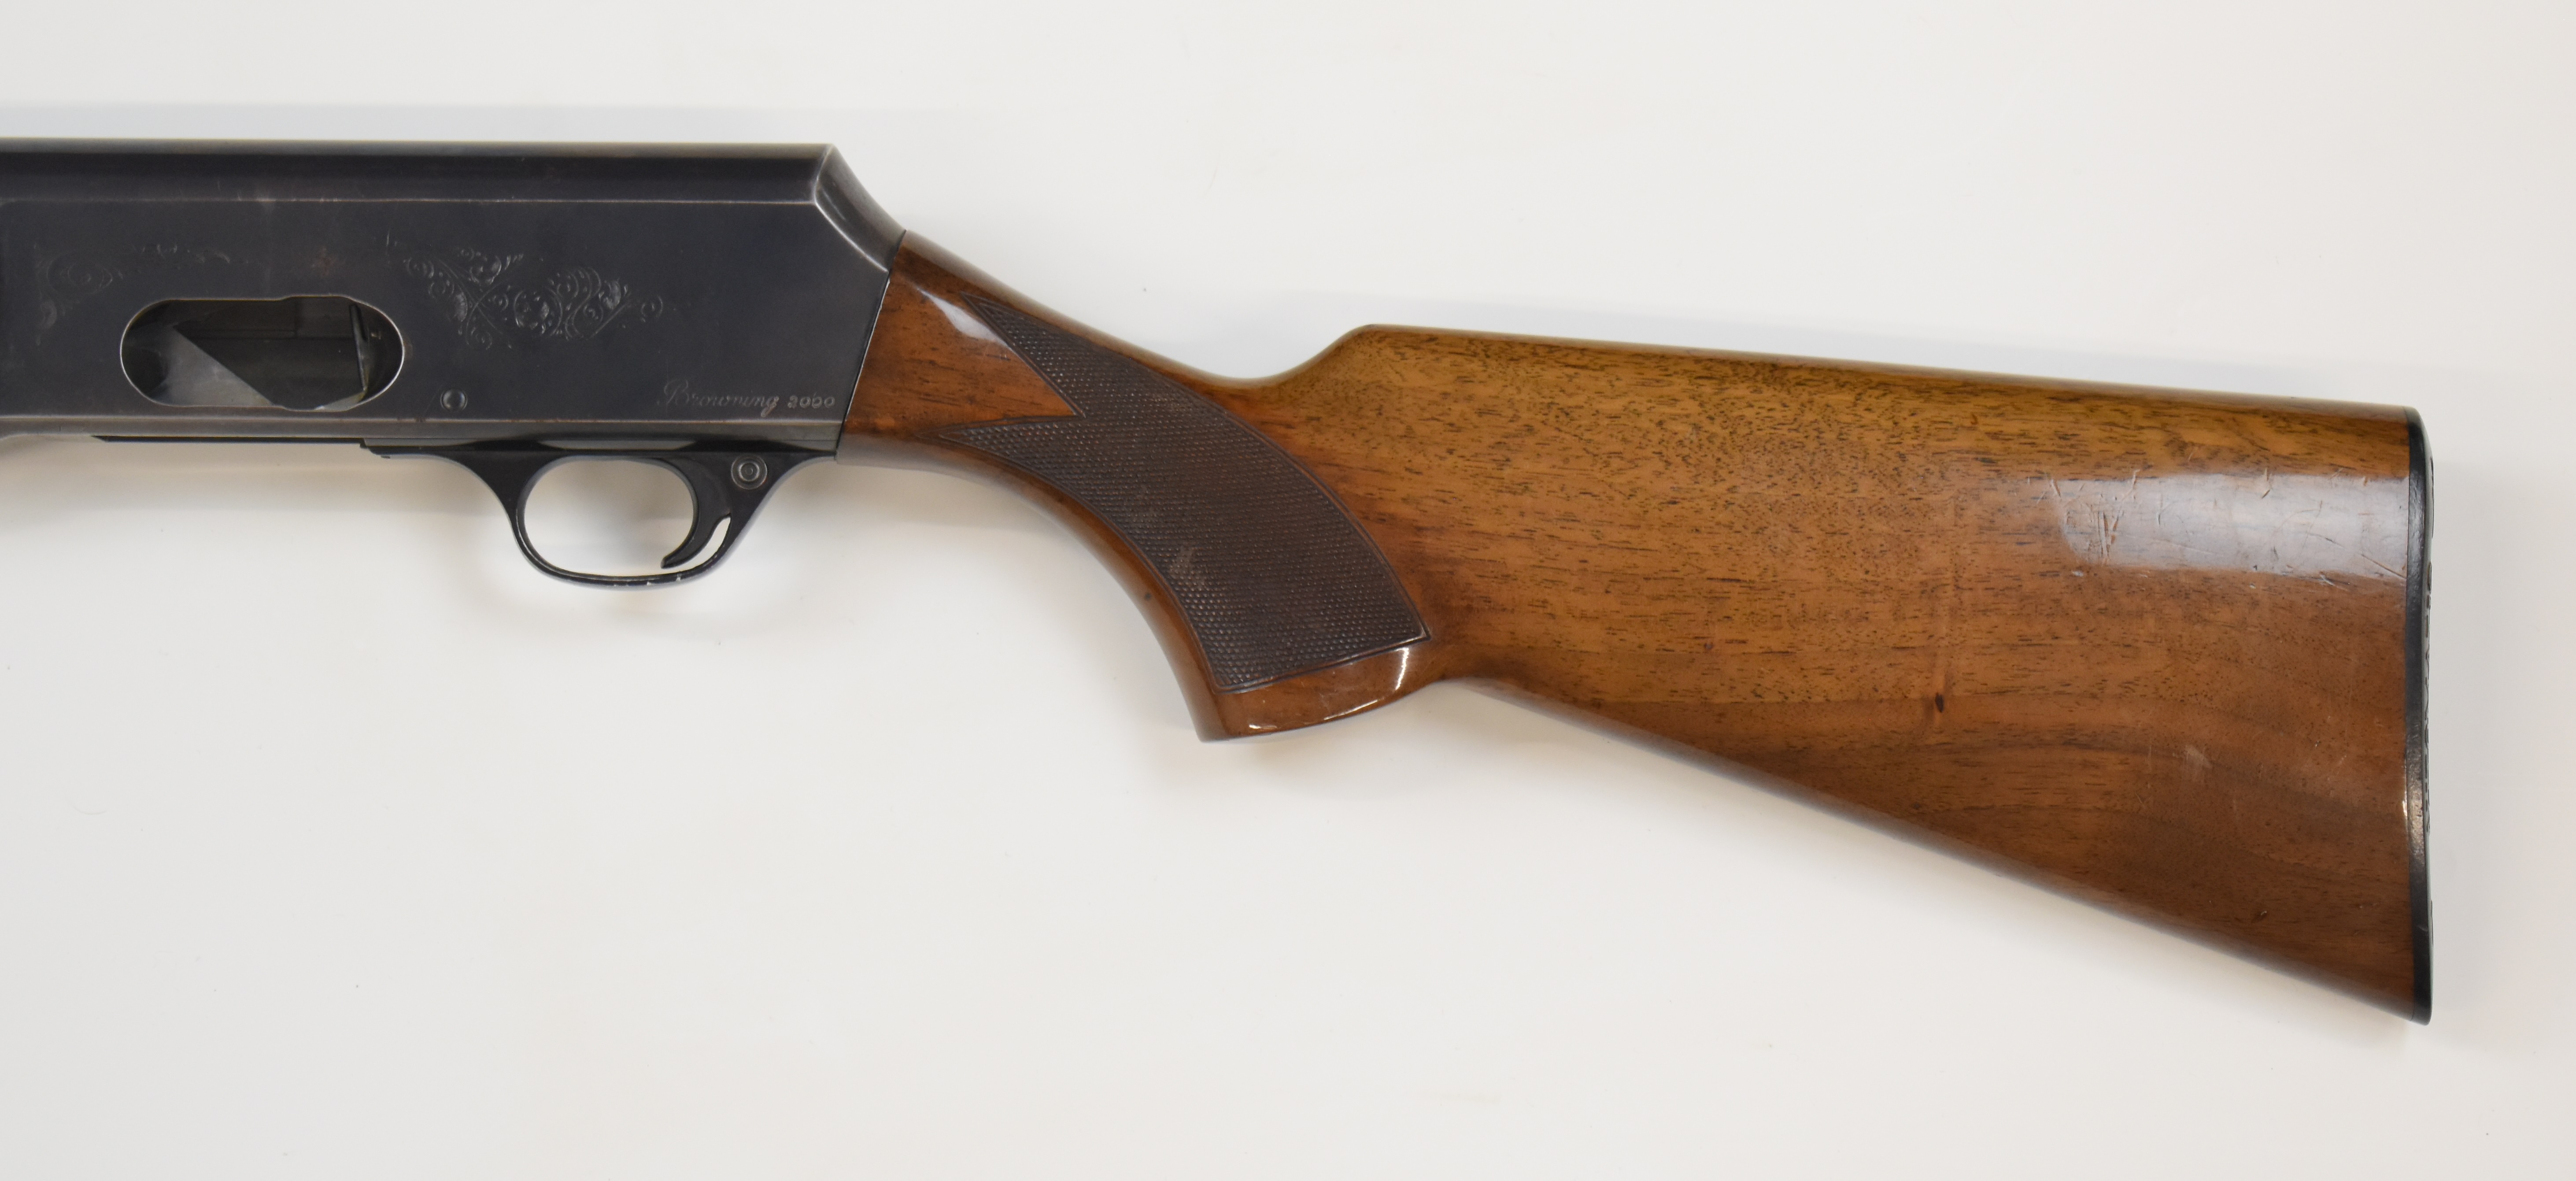 Browning 2000 12 bore 3-shot semi-automatic shotgun with named and engraved lock, chequered semi- - Image 9 of 11